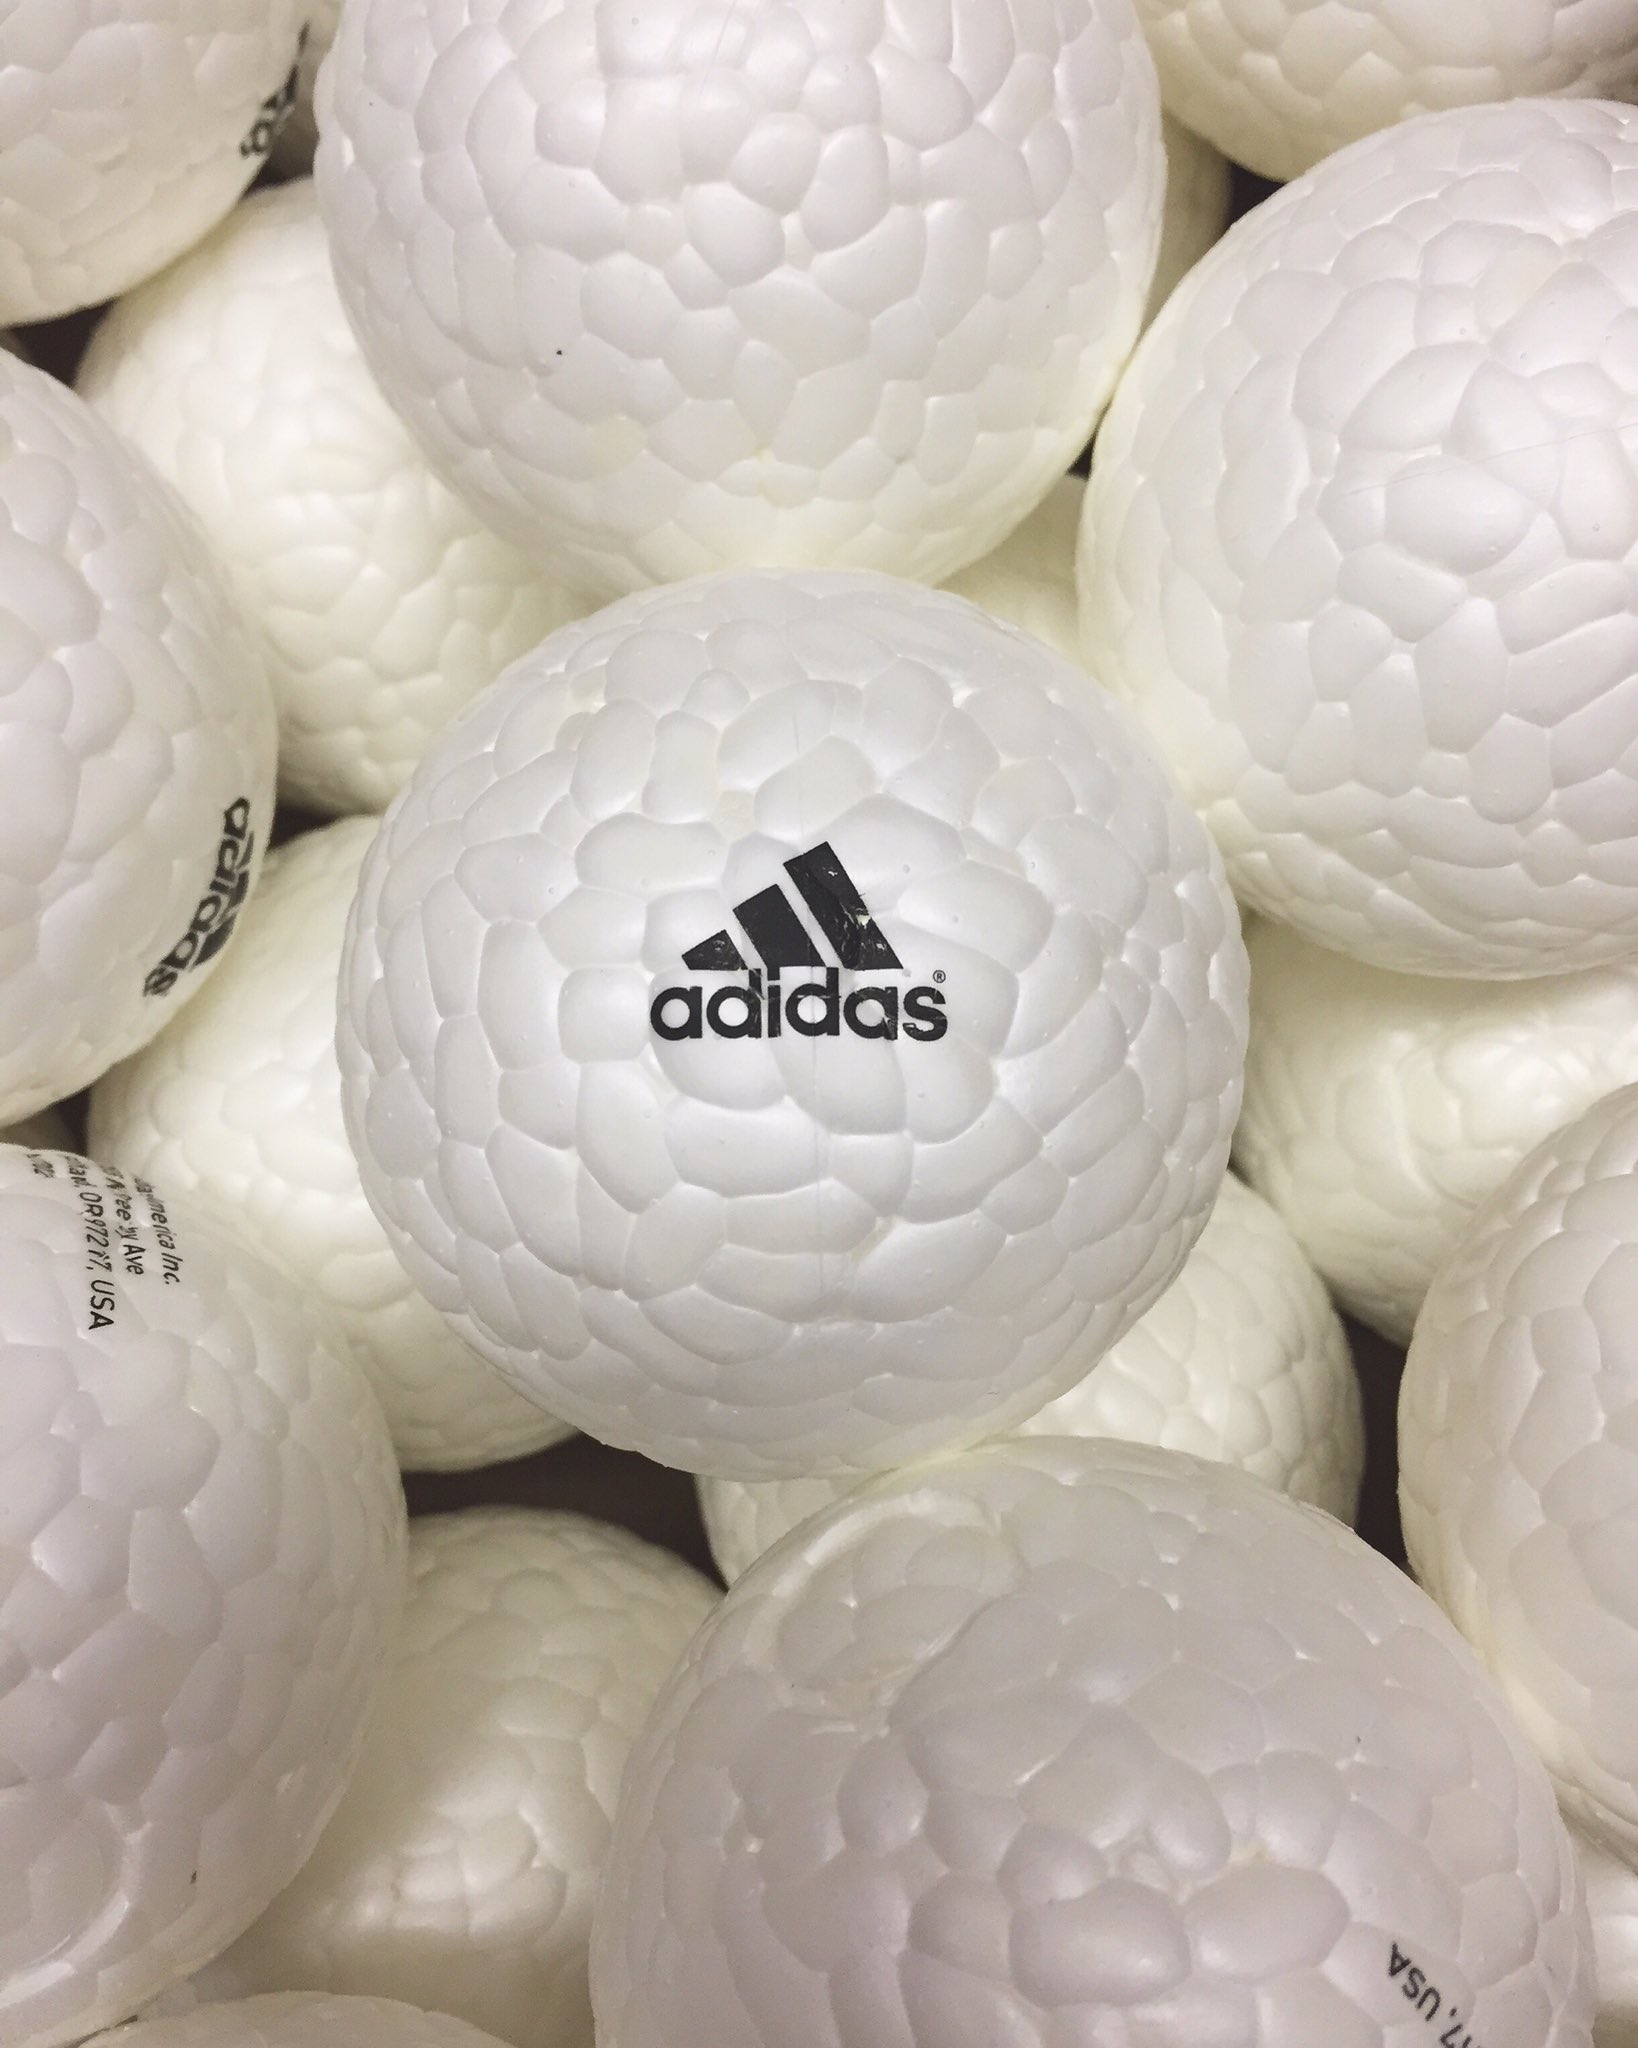 SoleCollector.com on Twitter: "FREE adidas Boost balls. Retweet this and for a chance to win. https://t.co/Of5Kwpr8GG" / Twitter